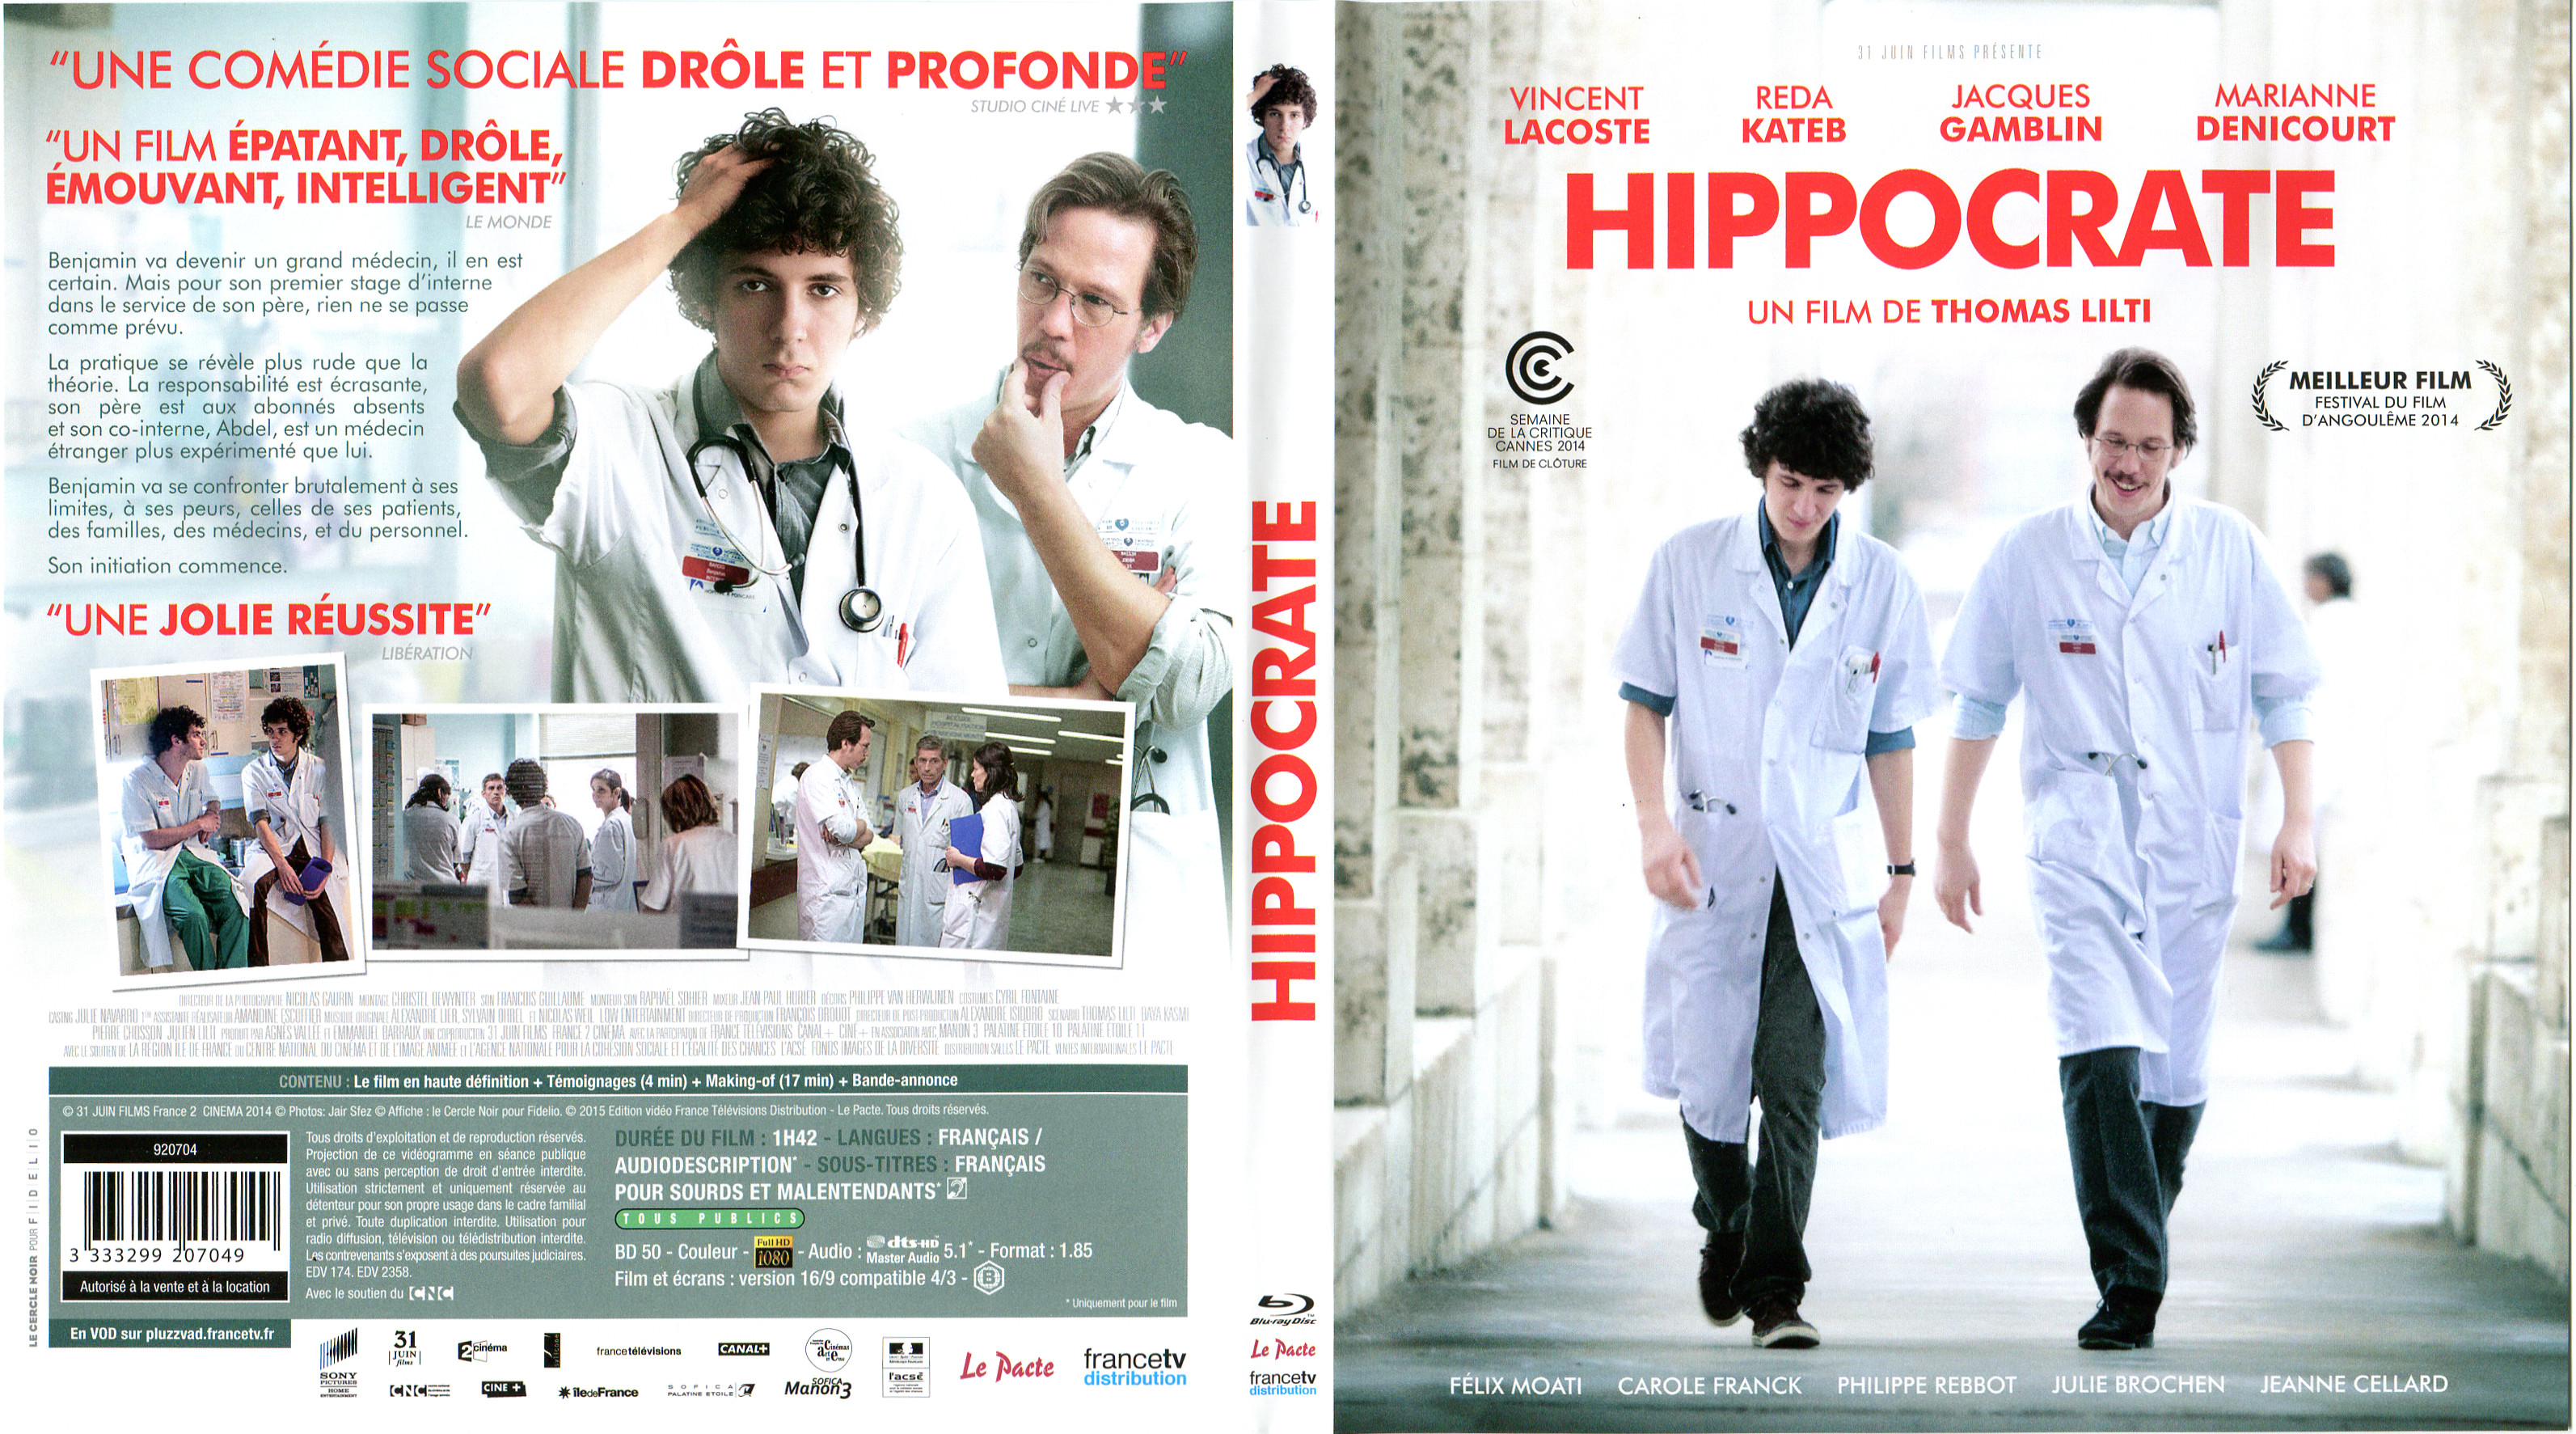 Jaquette DVD Hippocrate (BLU-RAY)